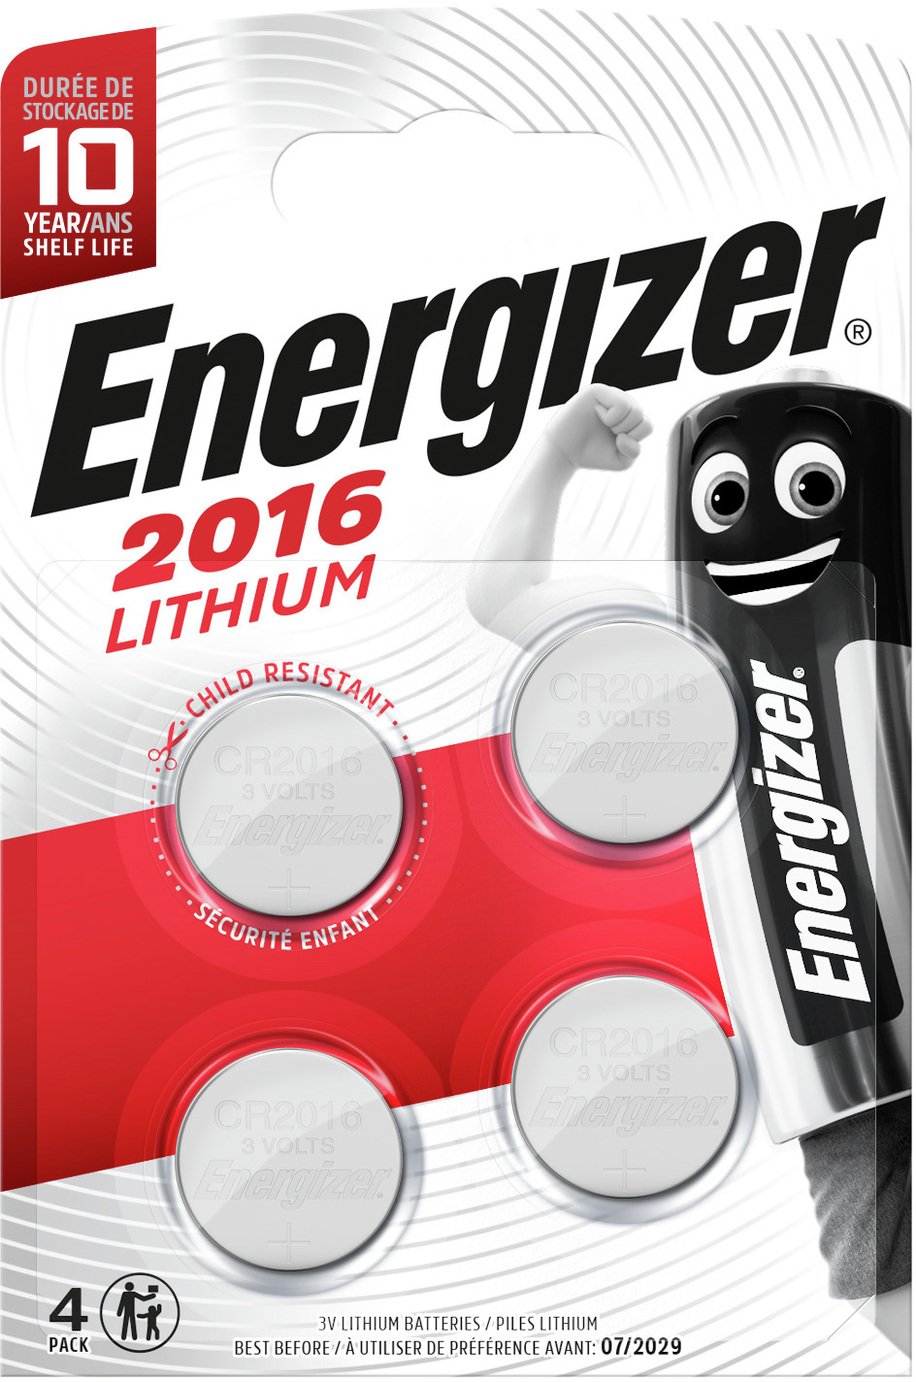 Energizer 2016 Lithium Coin Batteries - 4 Pack